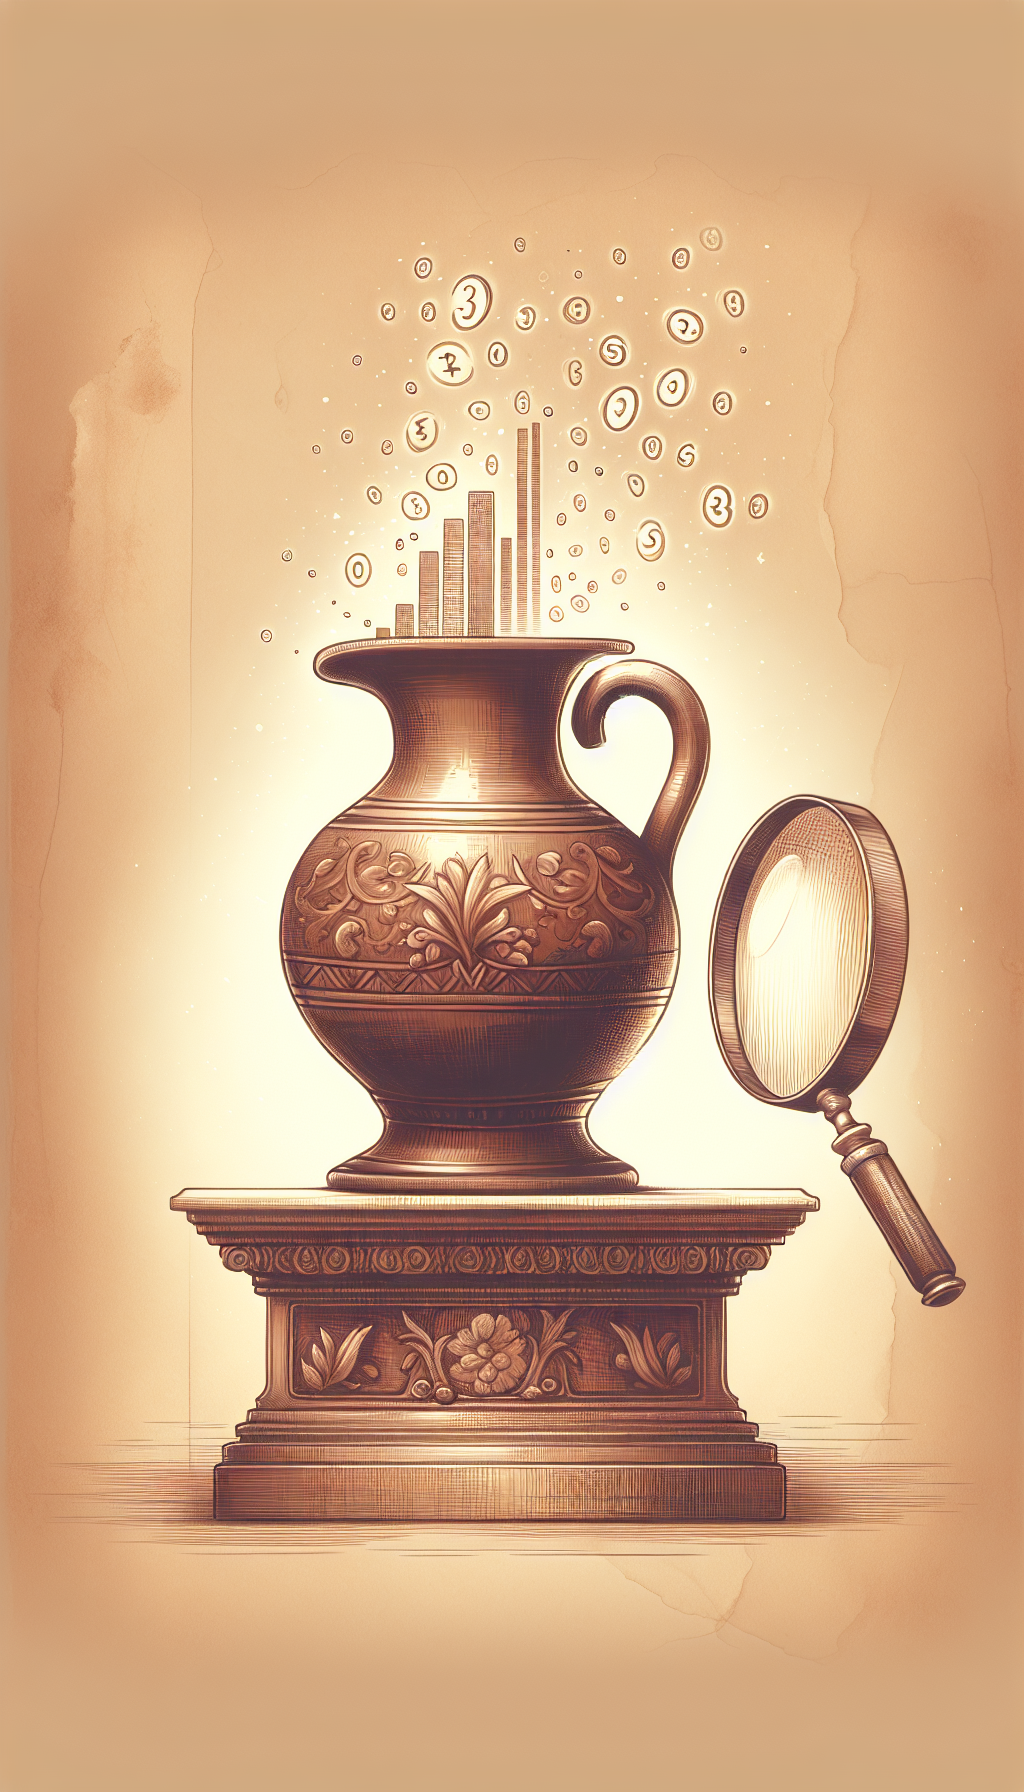 A whimsical, sepia-toned sketch captures a quaint antique brown jug perched atop an ornate pedestal. Soft, glowing numbers float upwards from its open mouth, suggesting a rising market value, while a magnifying glass hovers nearby, revealing fine, intricate patterns, signifying the comprehensive analysis involved in appraisal. The vintage aesthetic symbolizes the jug's antiquity and worth.